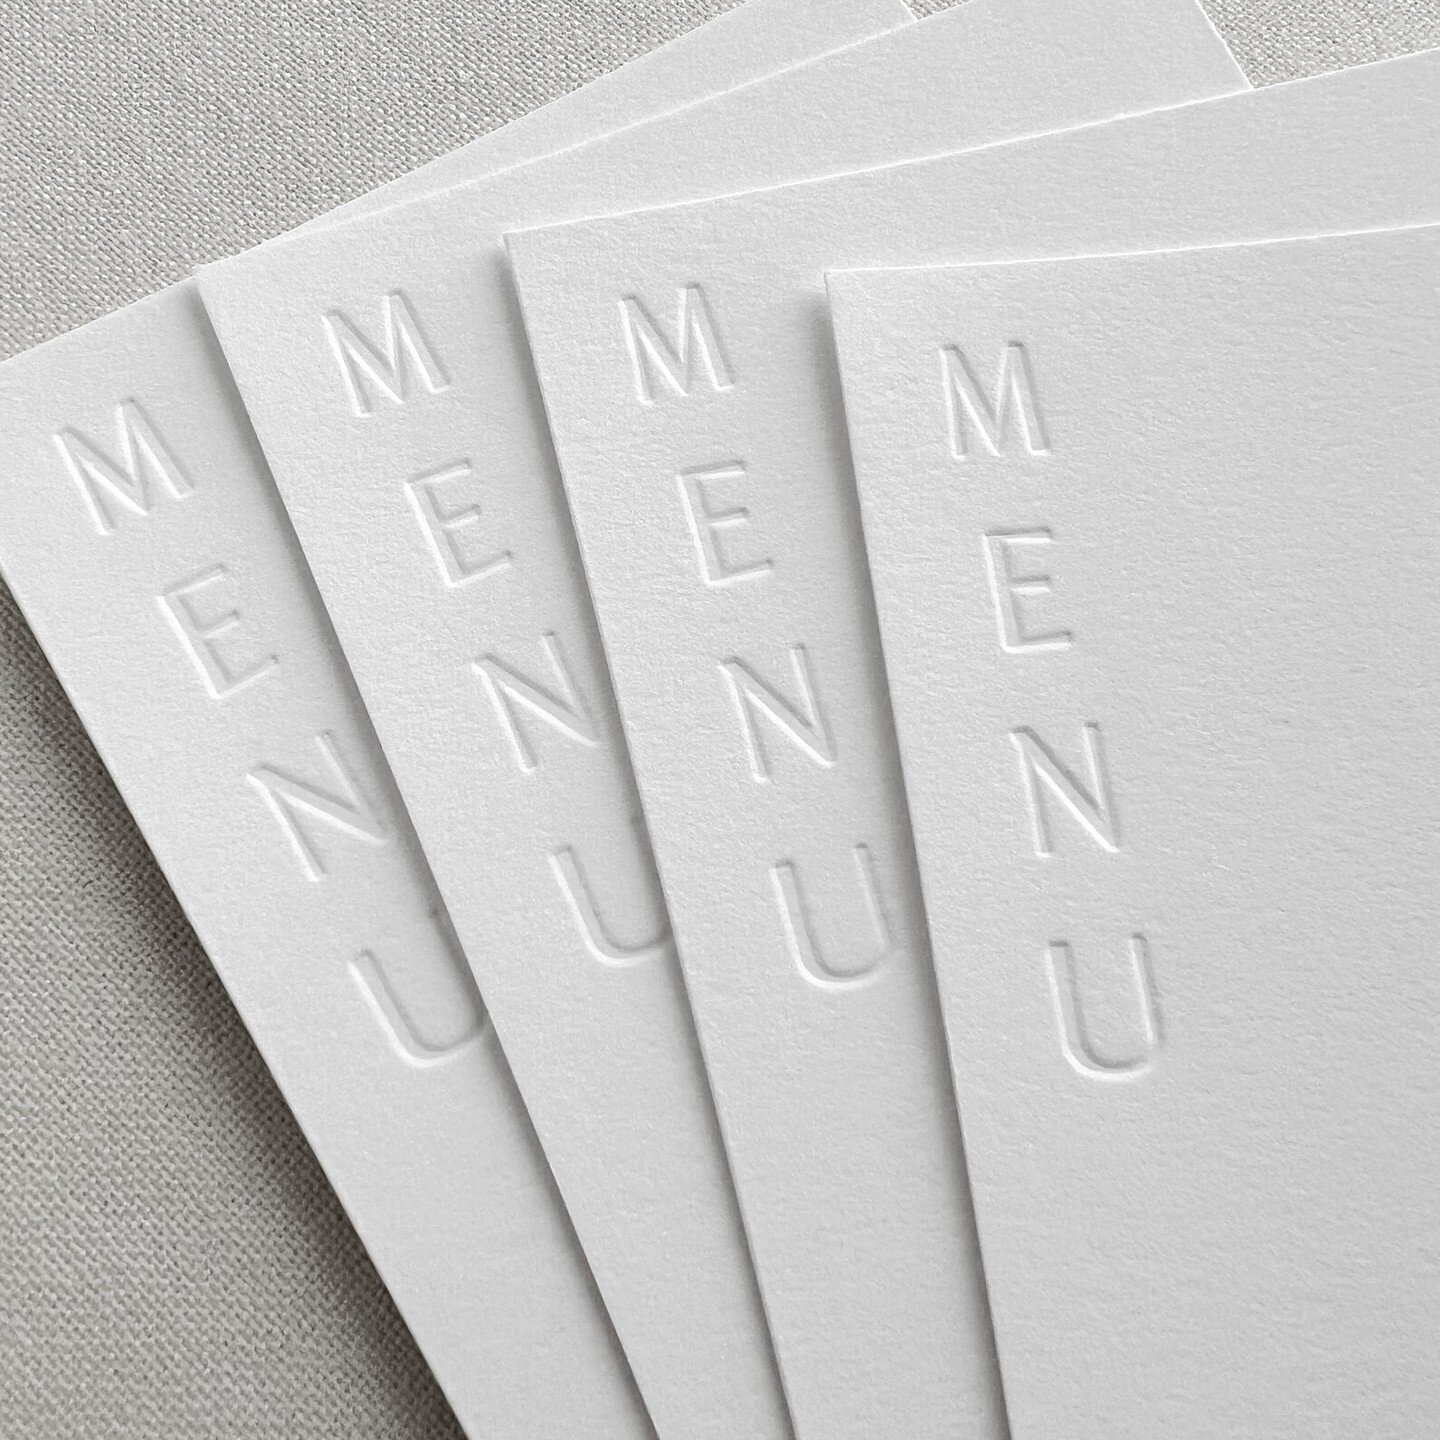 I just adore the dimensionality of a blind impression. So much so that we've got a new wedding suite featuring blind letterpress headers coming your way. These wedding menus are already available to shop; invitations to come soon! #letterpress